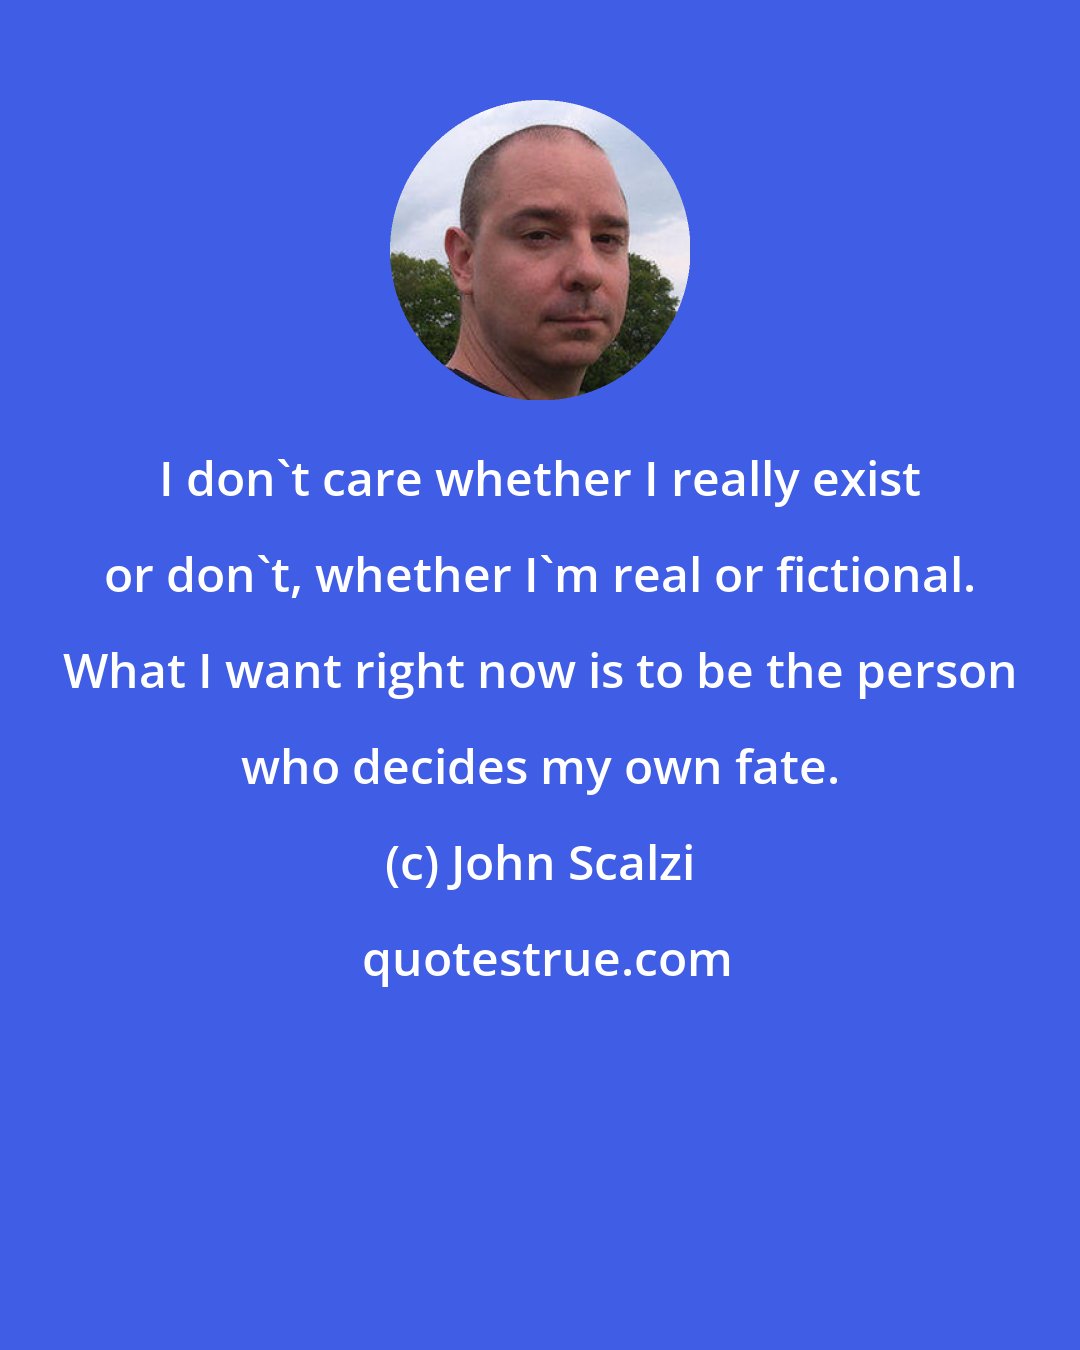 John Scalzi: I don't care whether I really exist or don't, whether I'm real or fictional. What I want right now is to be the person who decides my own fate.